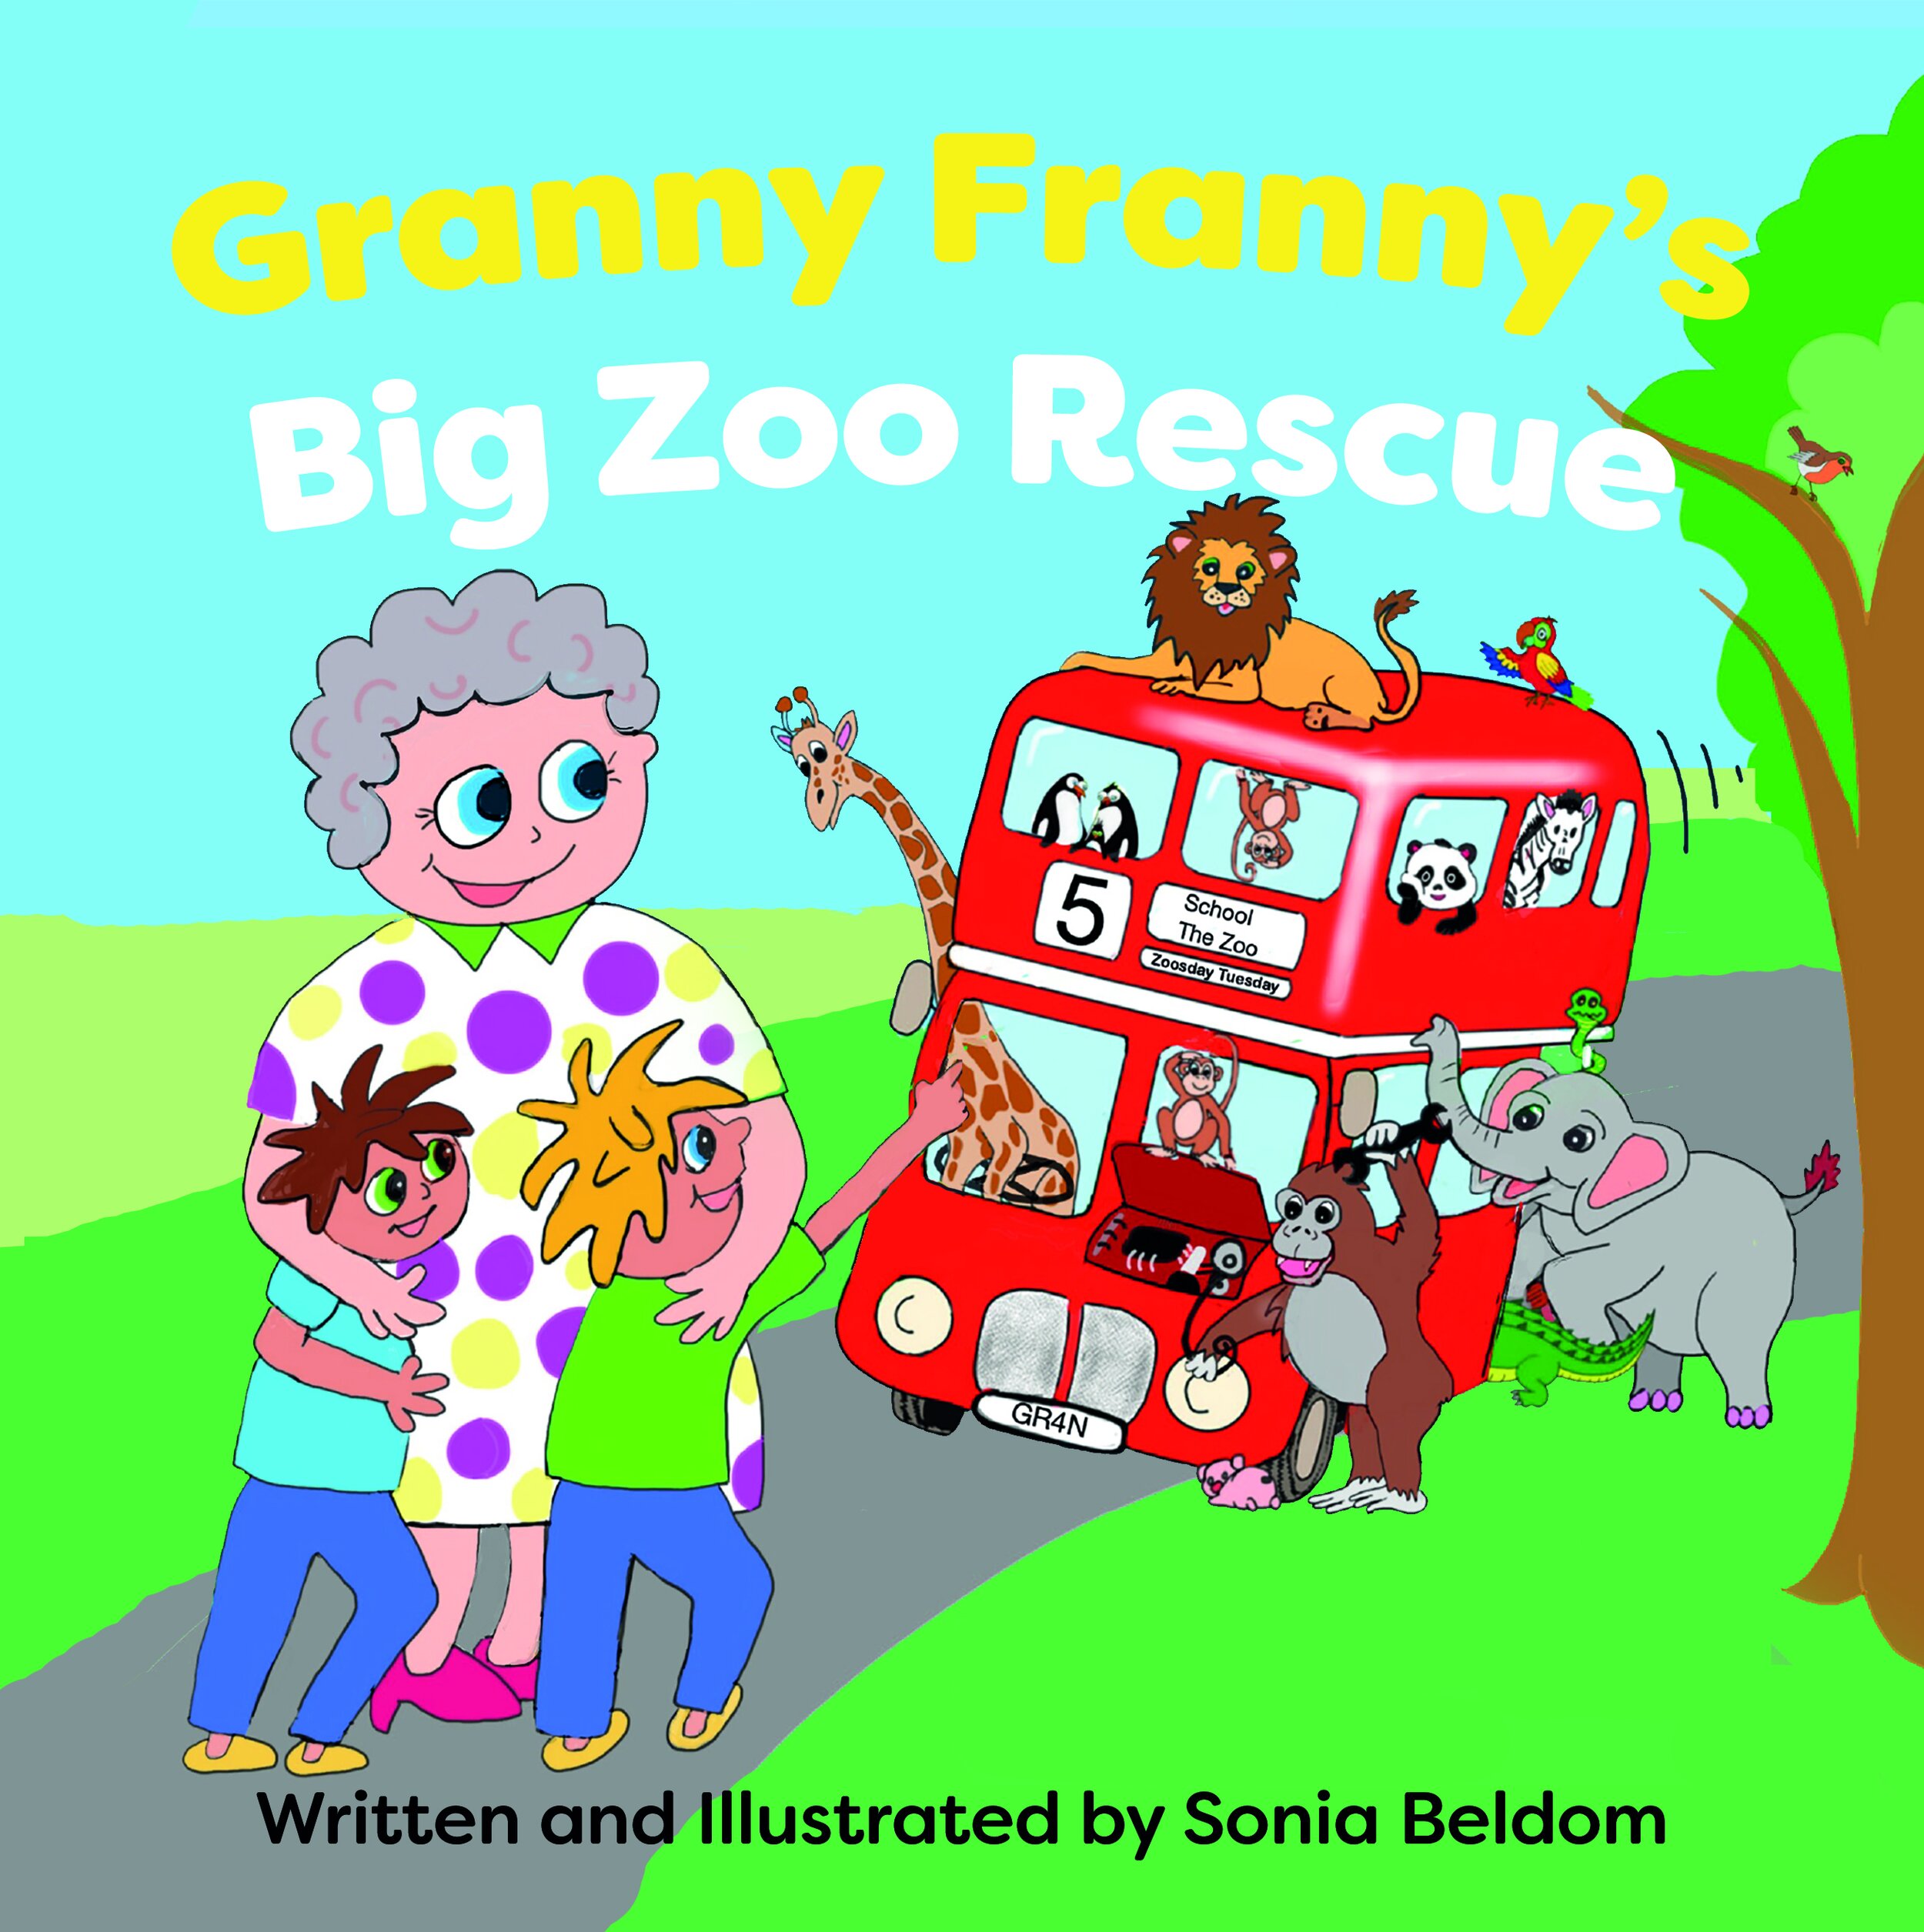 Big Zoo Rescue Front Cover.jpg